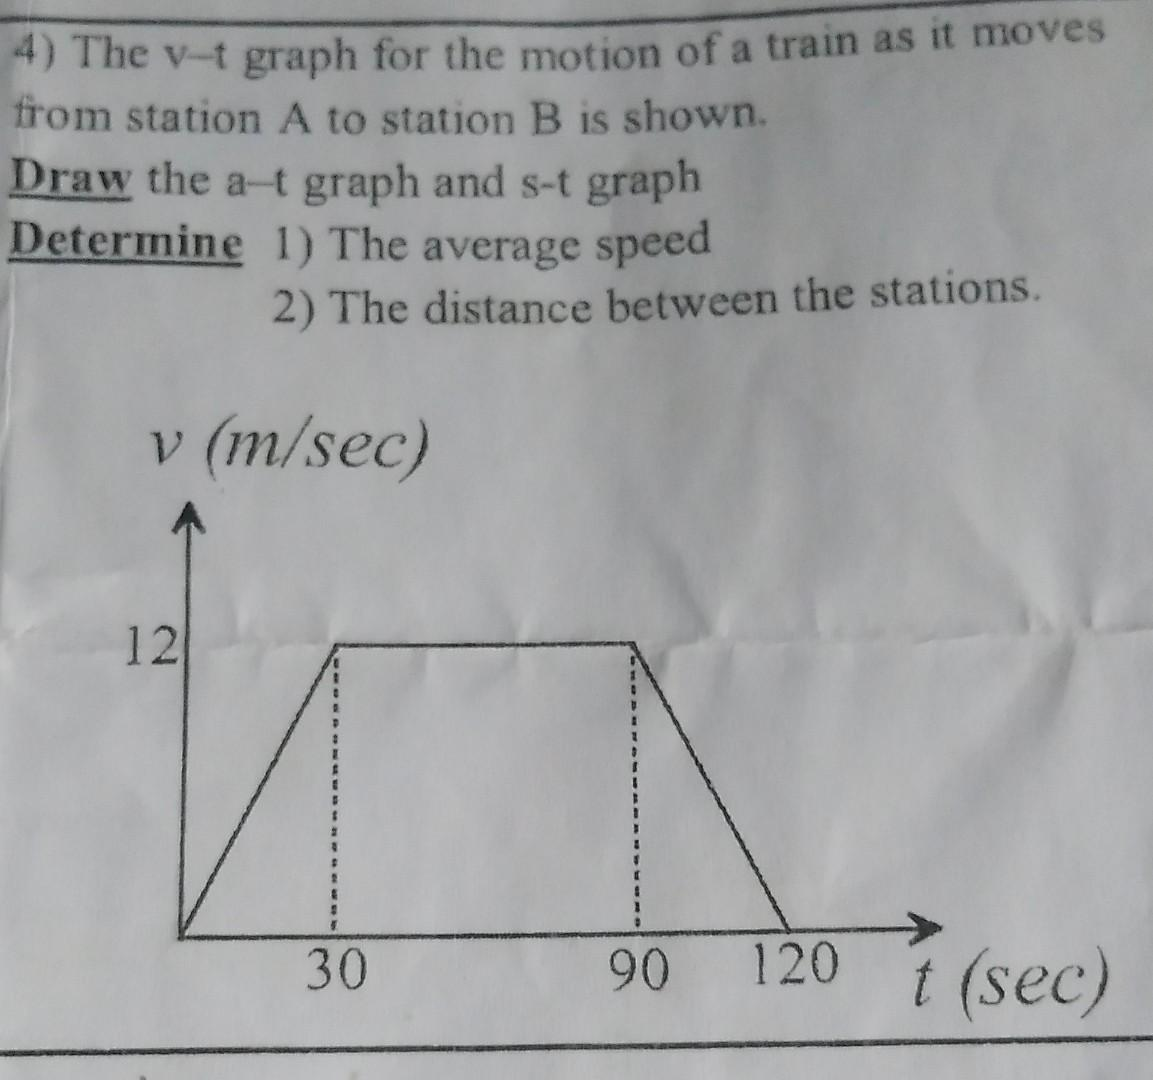 4) The v-t graph for the motion of a train as it moves
from station A to station B is shown.
Draw the a-t graph and s-t graph
Determine 1) The average speed
2) The distance between the stations.
v (m/sec)
12
30
90 120 t (sec)